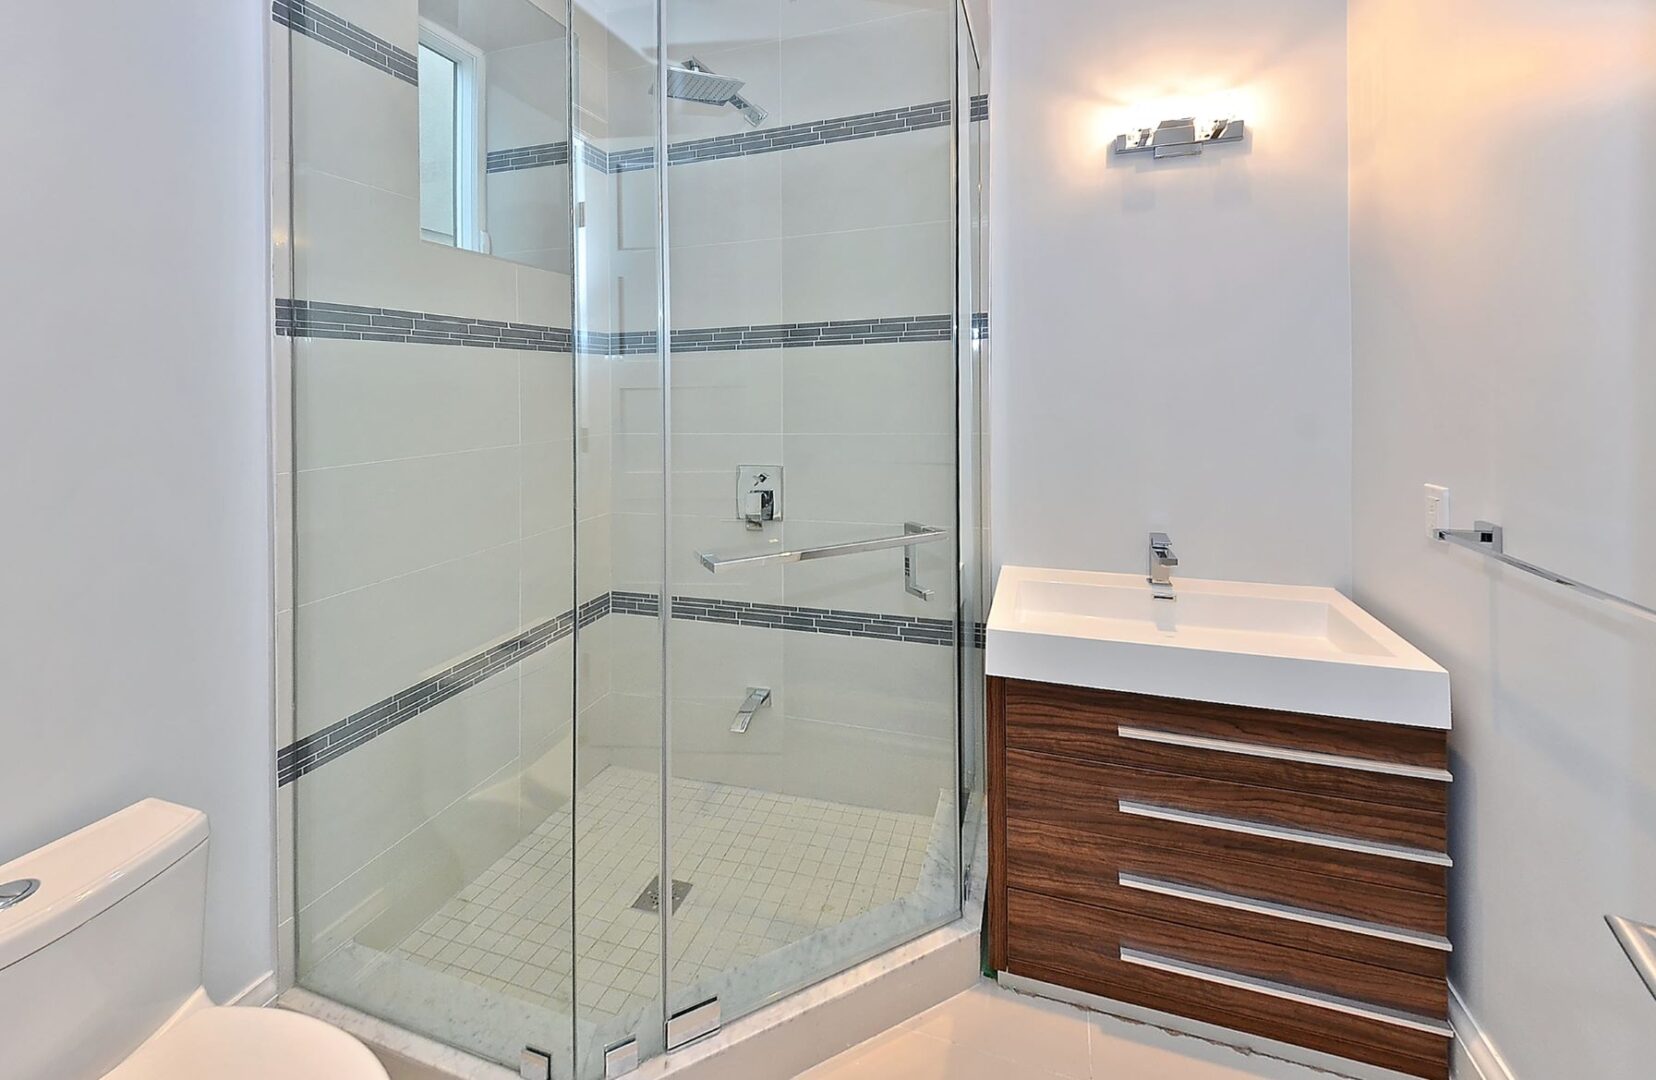 A Corner Shower Cabinet With a Sink Beside